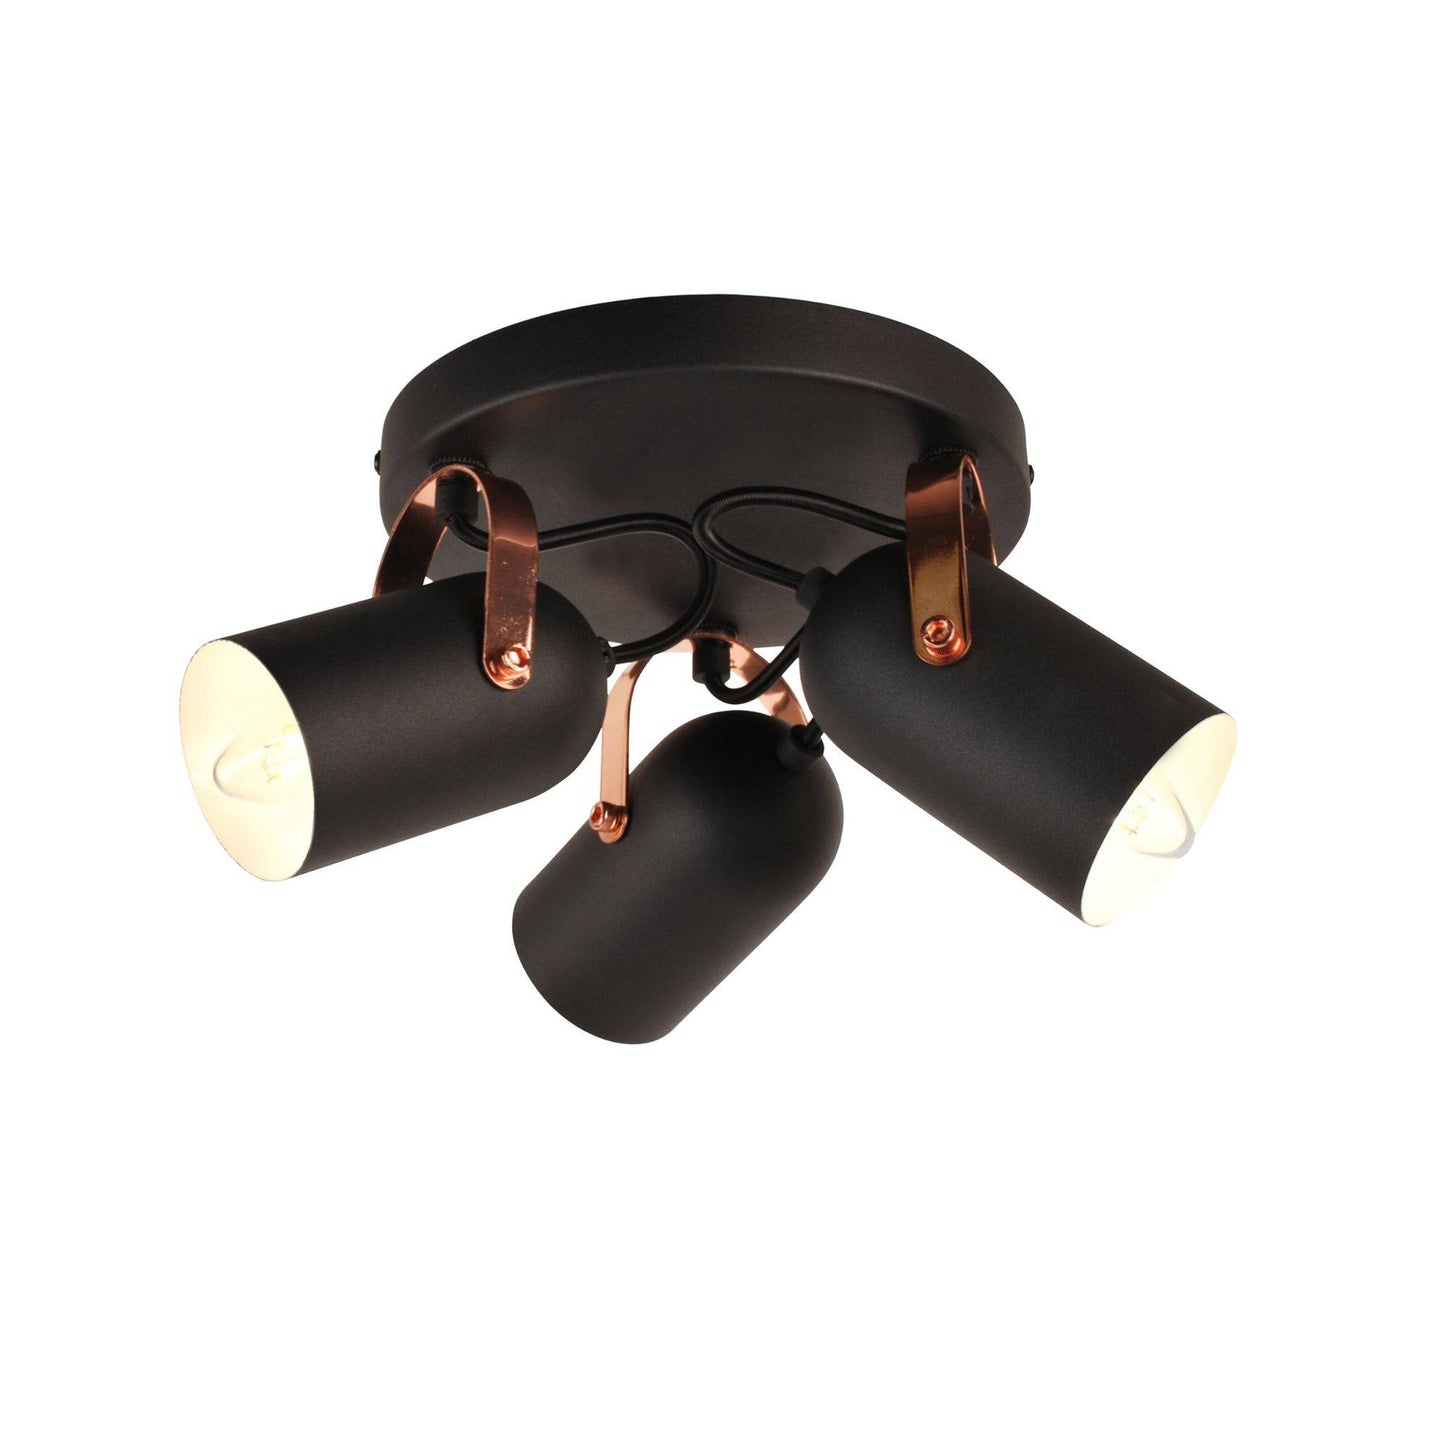 Letto Black and Copper 3 Light Ceiling Spotlight Plate